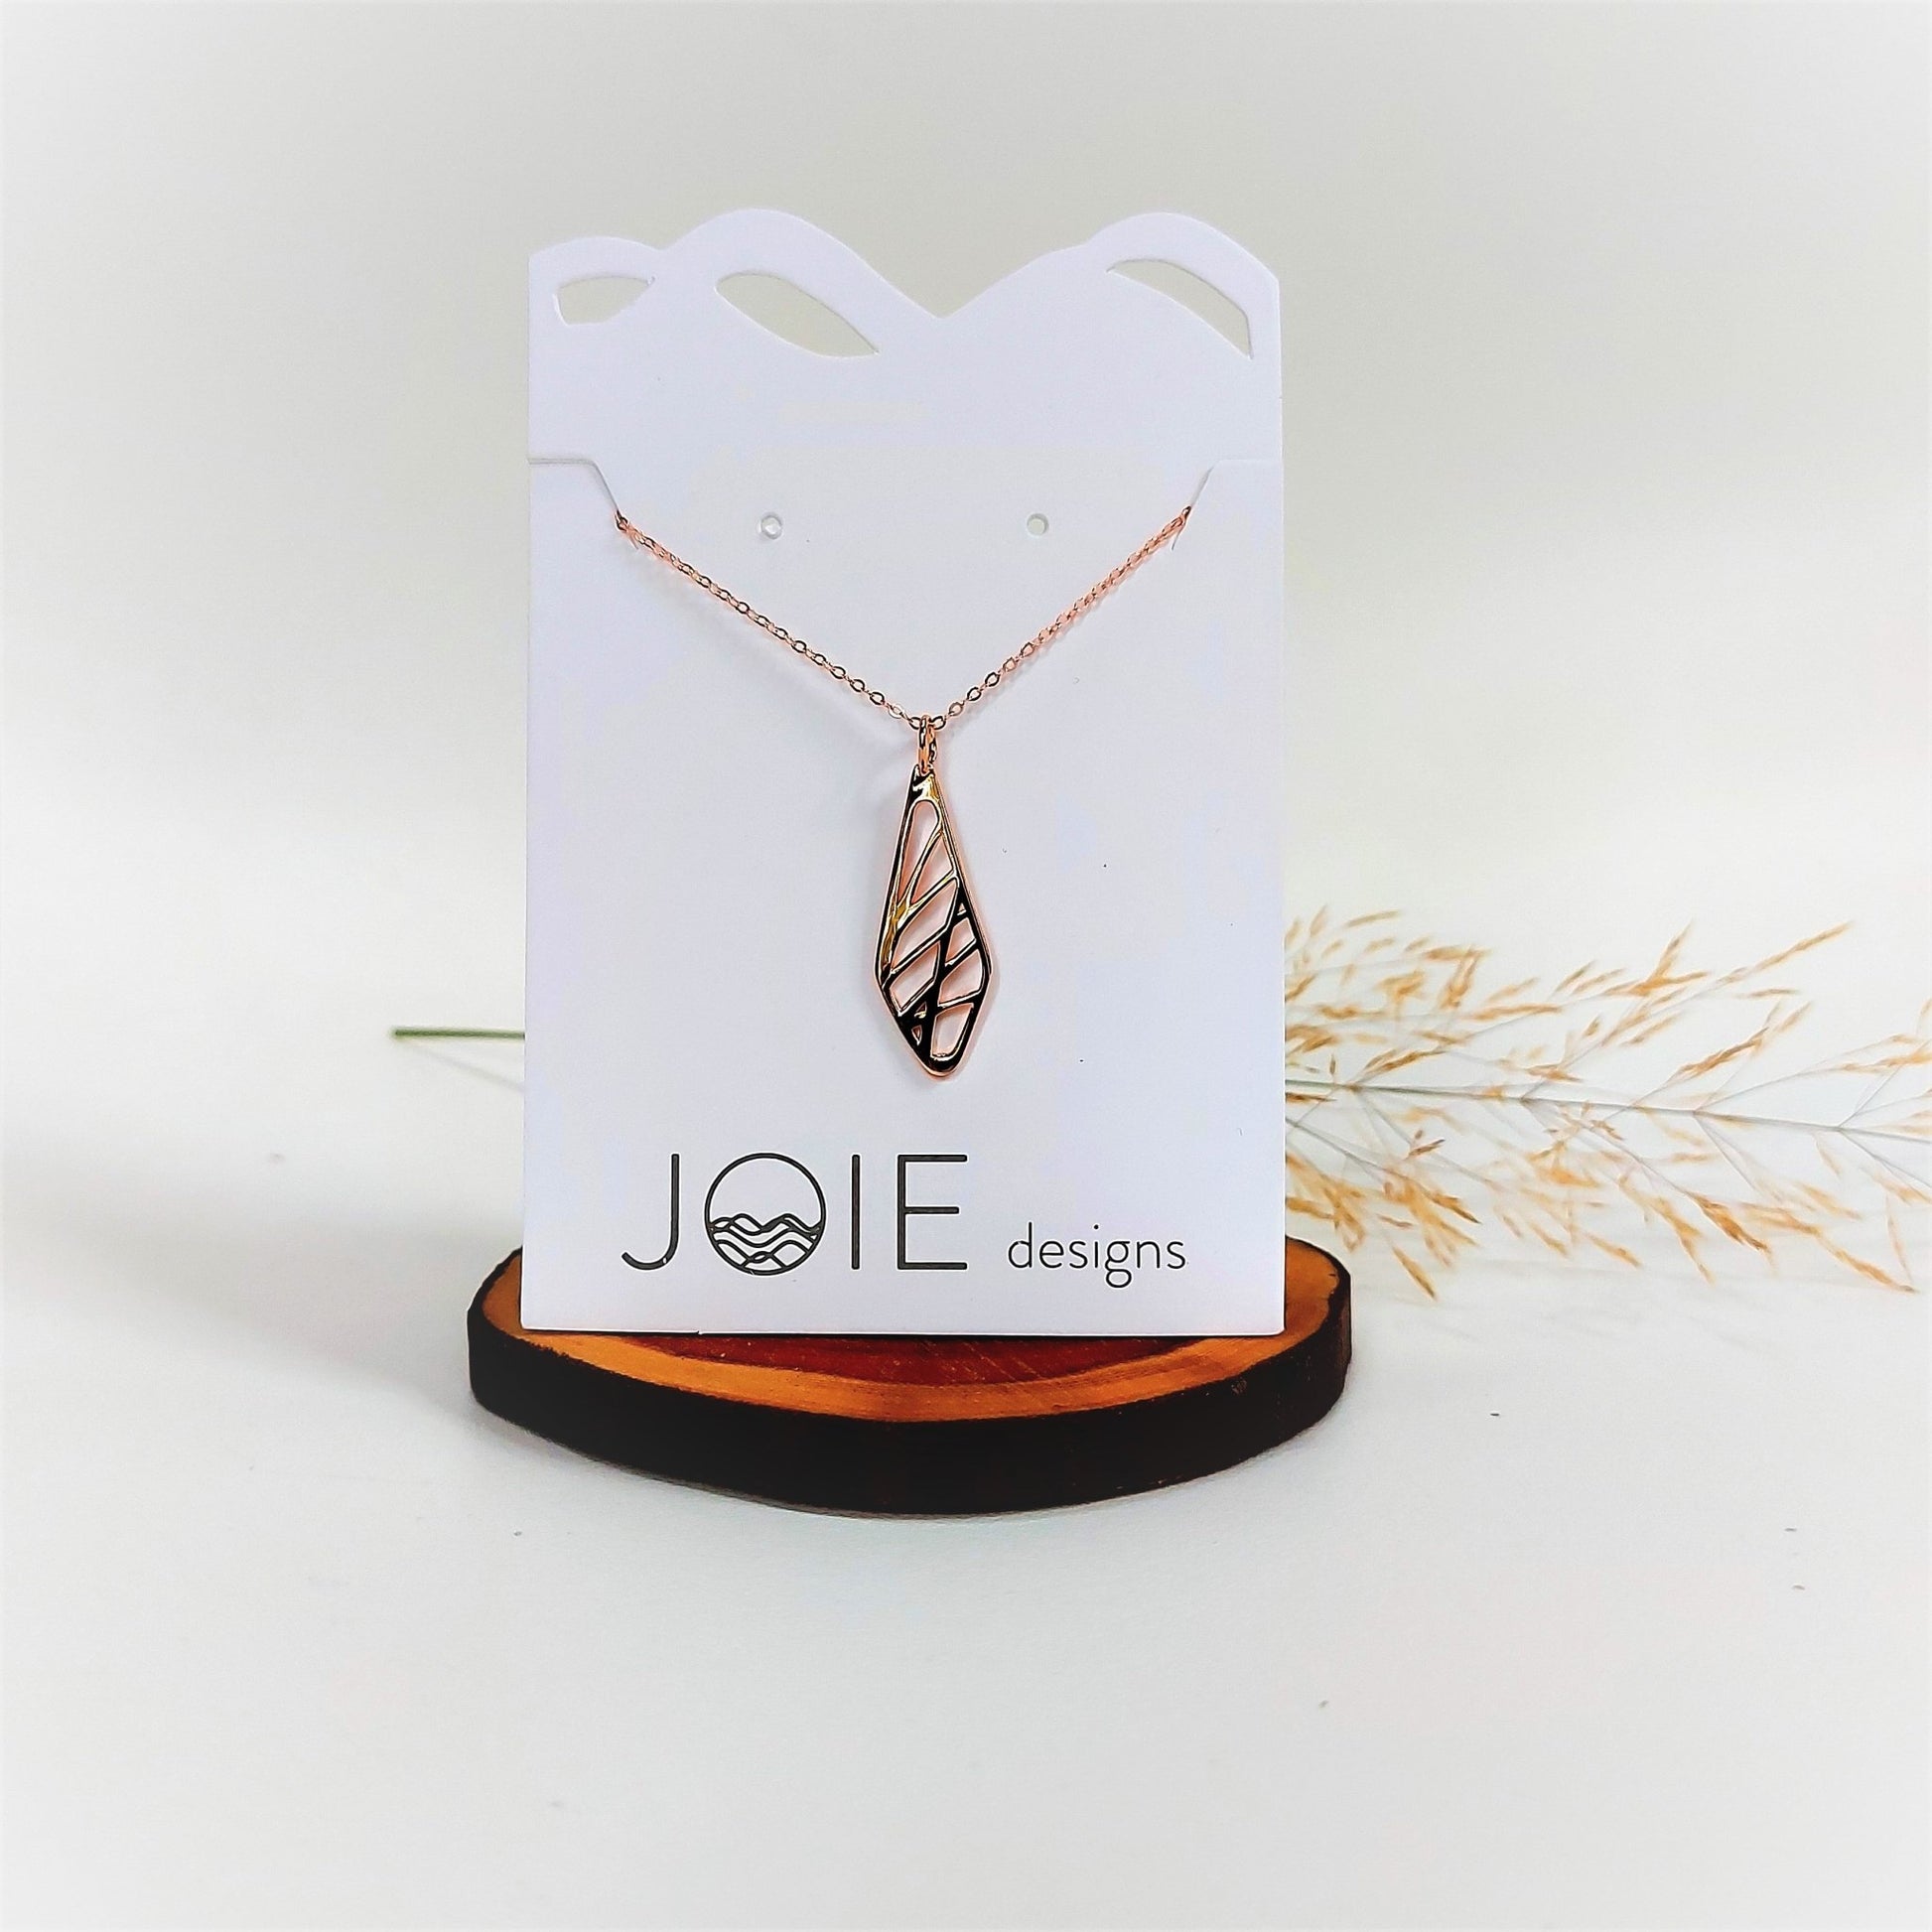 18k rose gold plated diamond and grass pattern pendant necklace showcased on a jewellery card